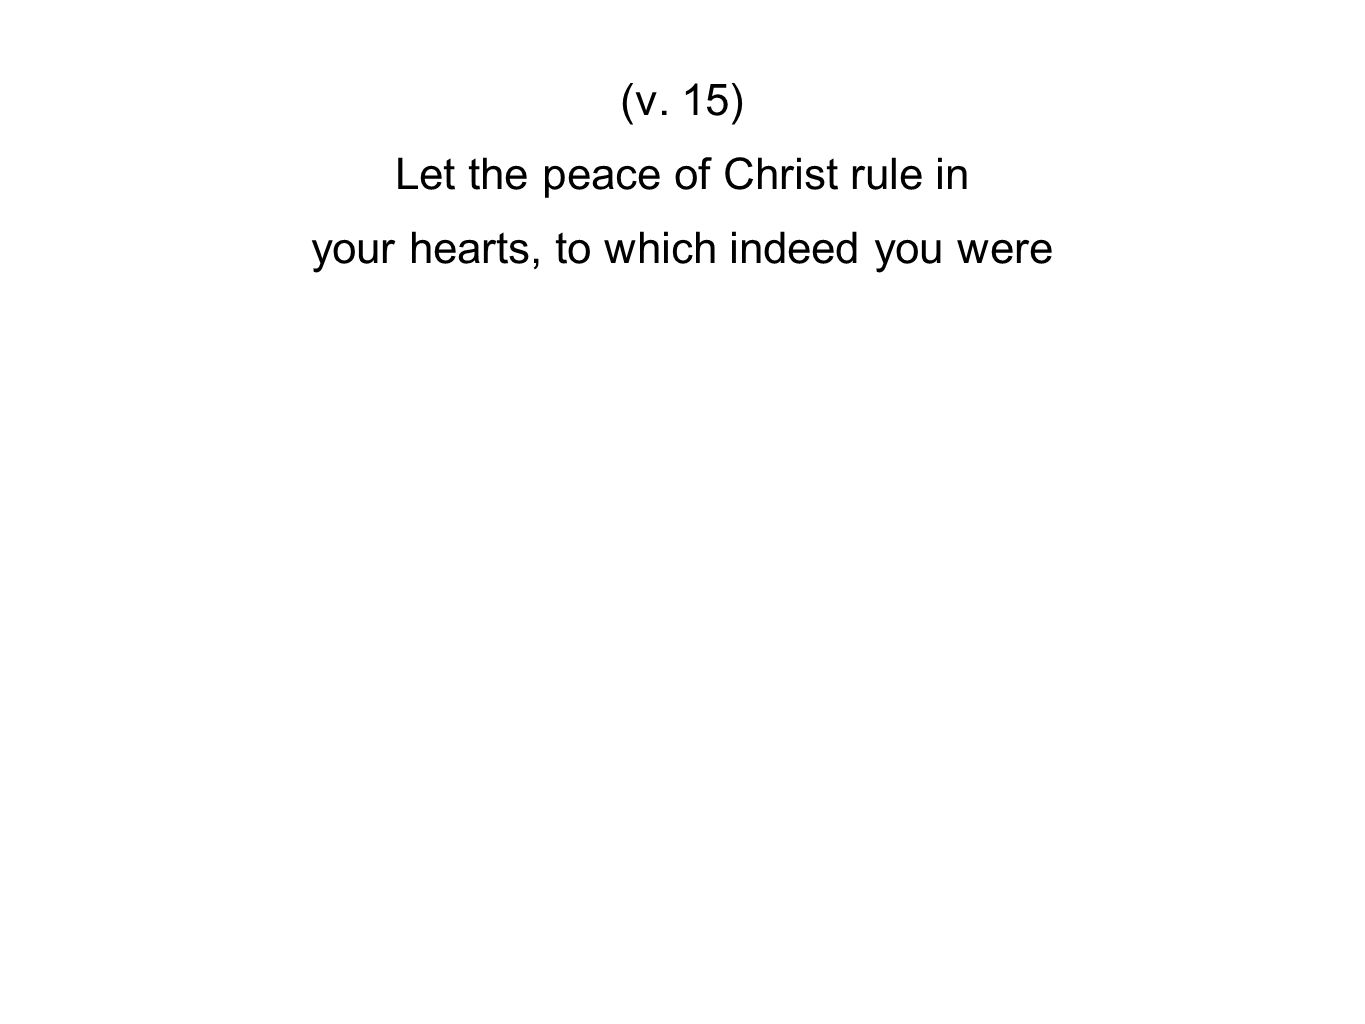 (v. 15) Let the peace of Christ rule in your hearts, to which indeed you were